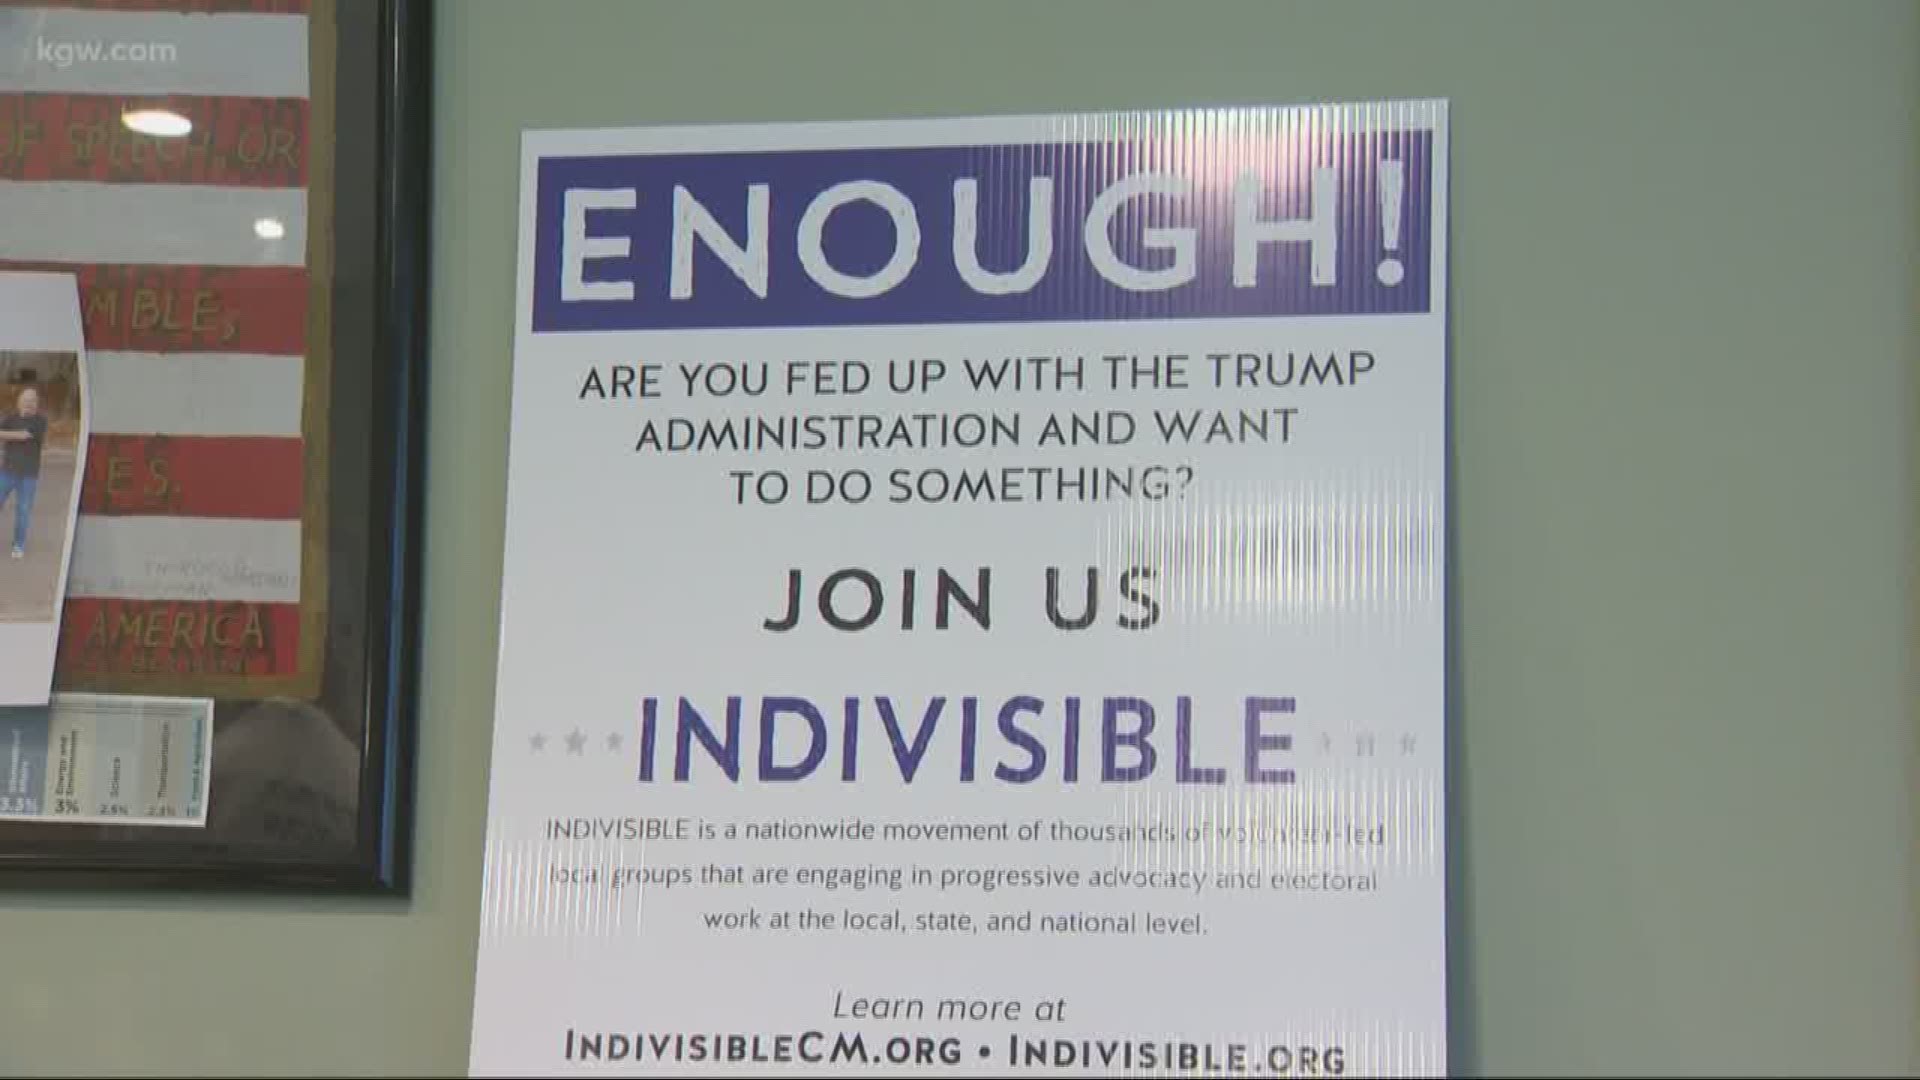 Here in Portland, protesters are gearing up for the impeachment vote. The group, Indivisible Cedar Mill, made signs today for an impeachment rally they’re holding on